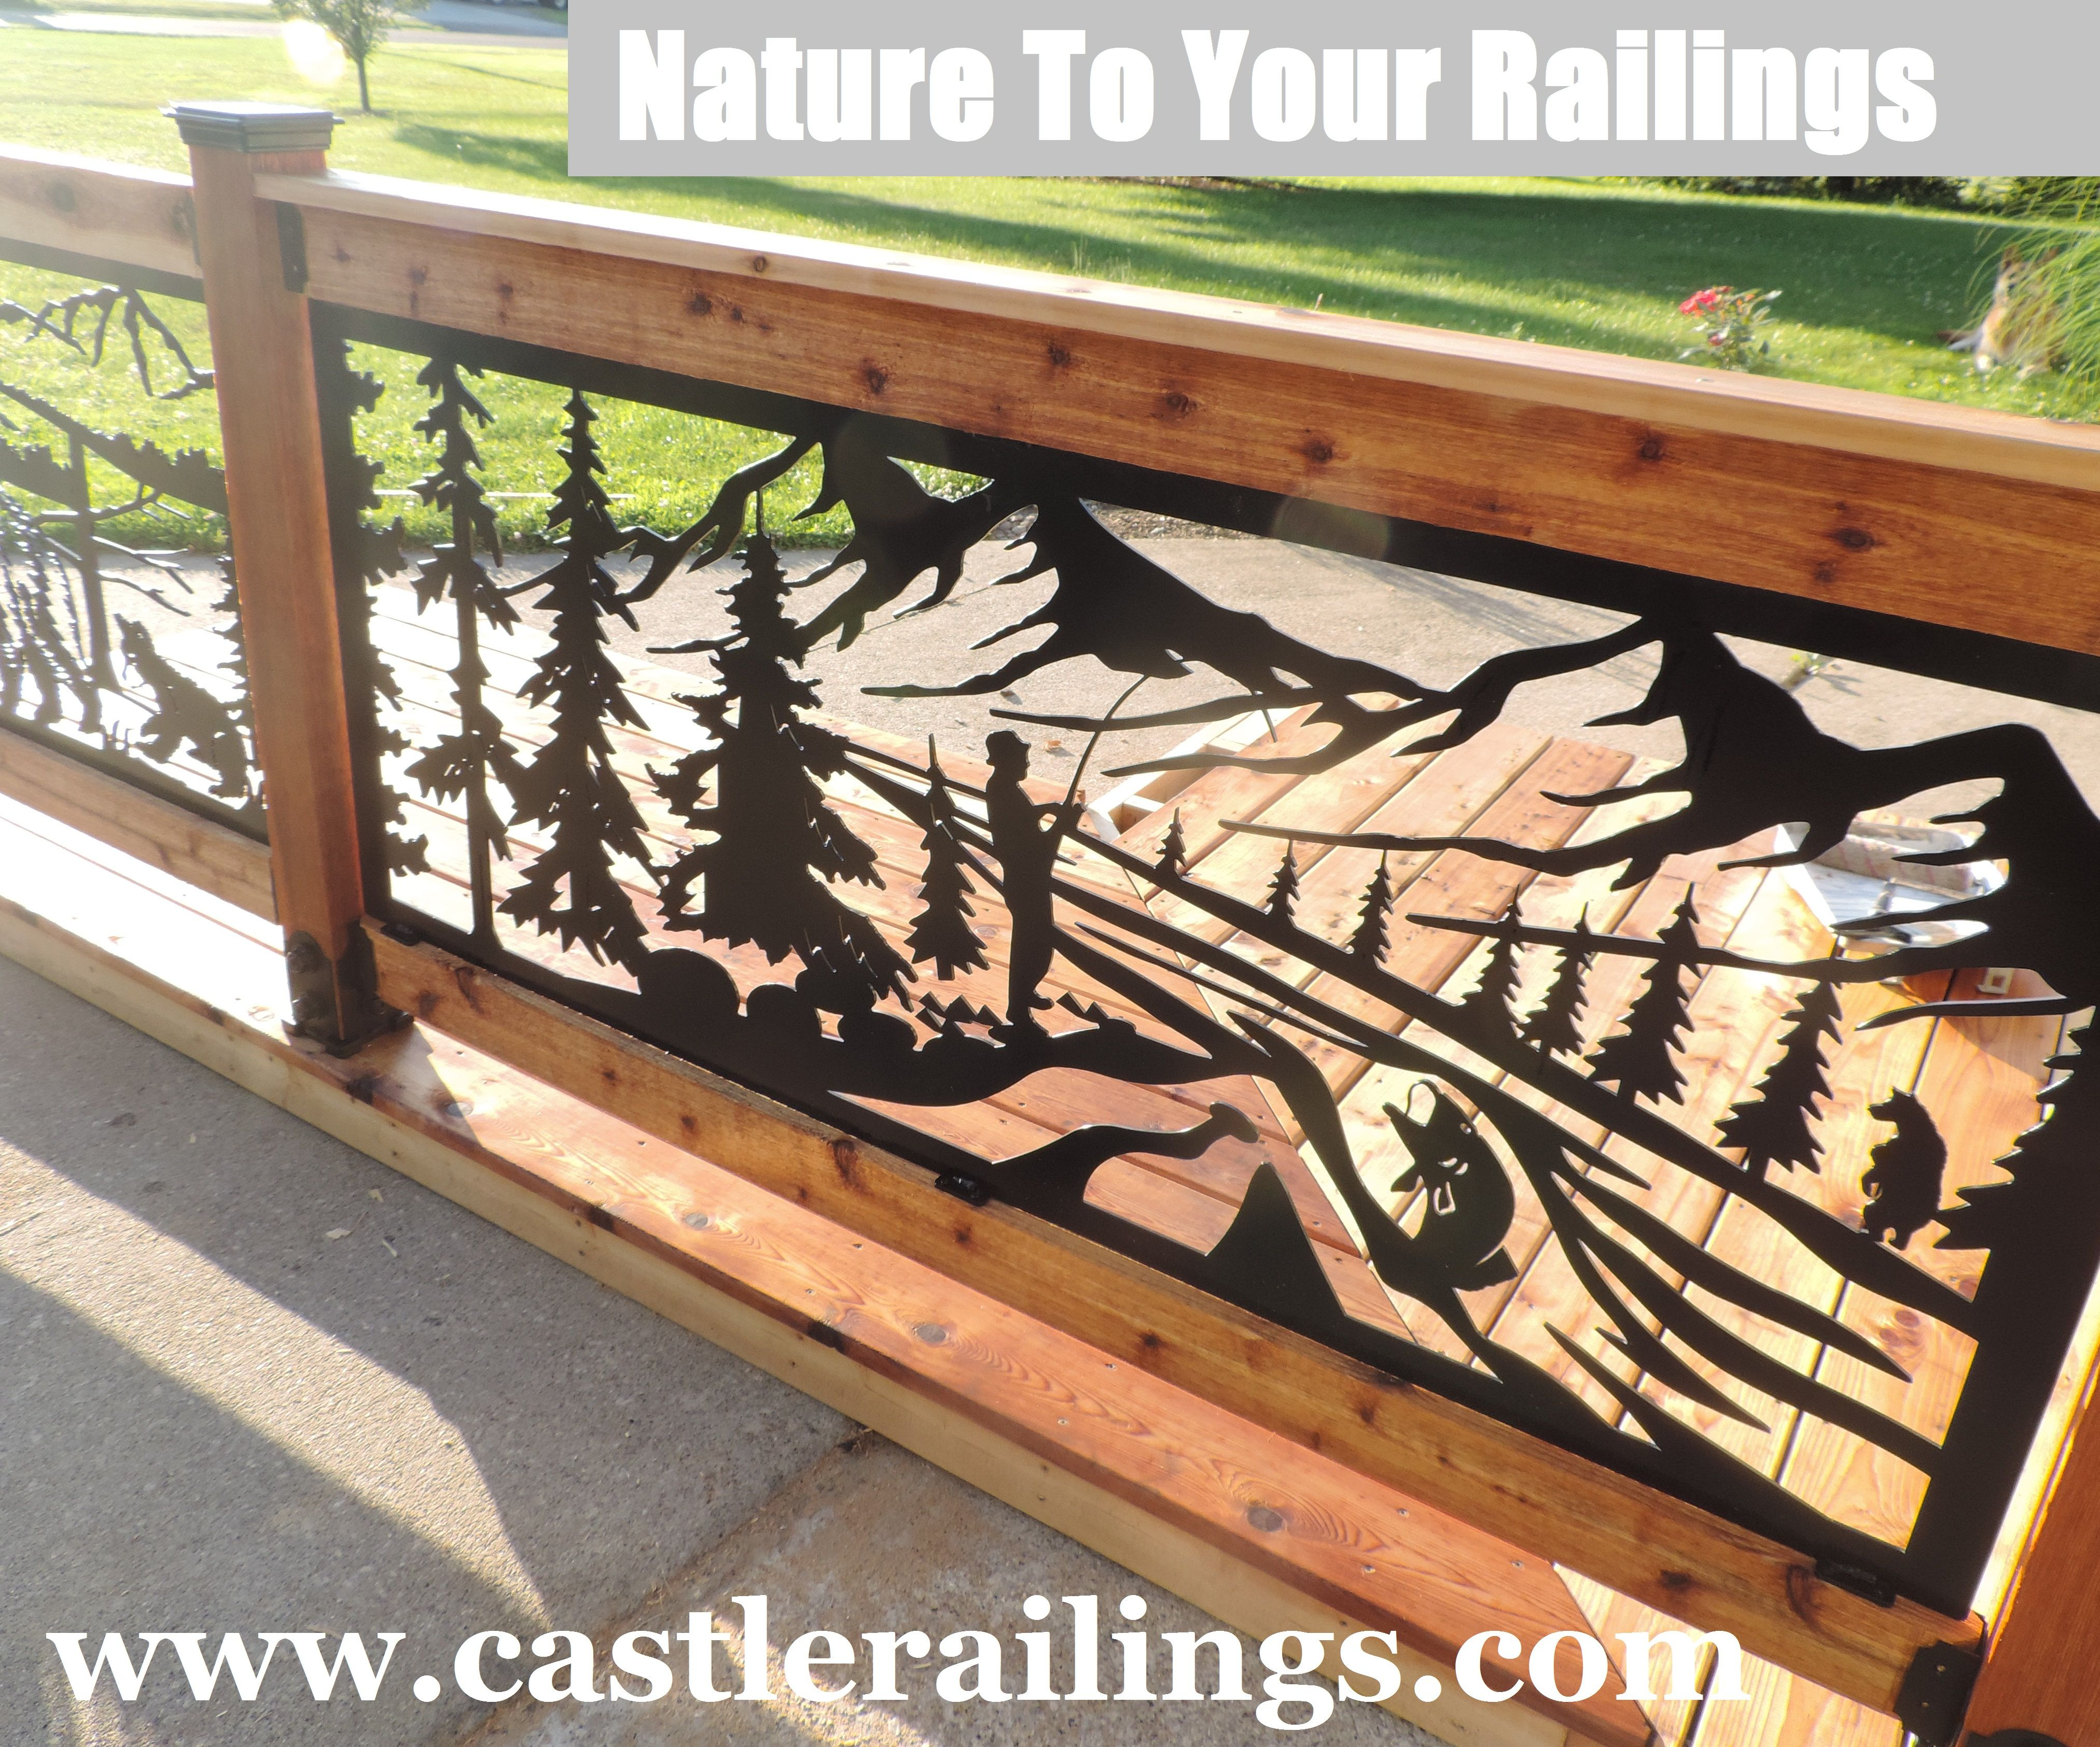 Never Needs Painted Laser Cut Railings Rustic Deck Bring Nature inside size 4049 X 3369